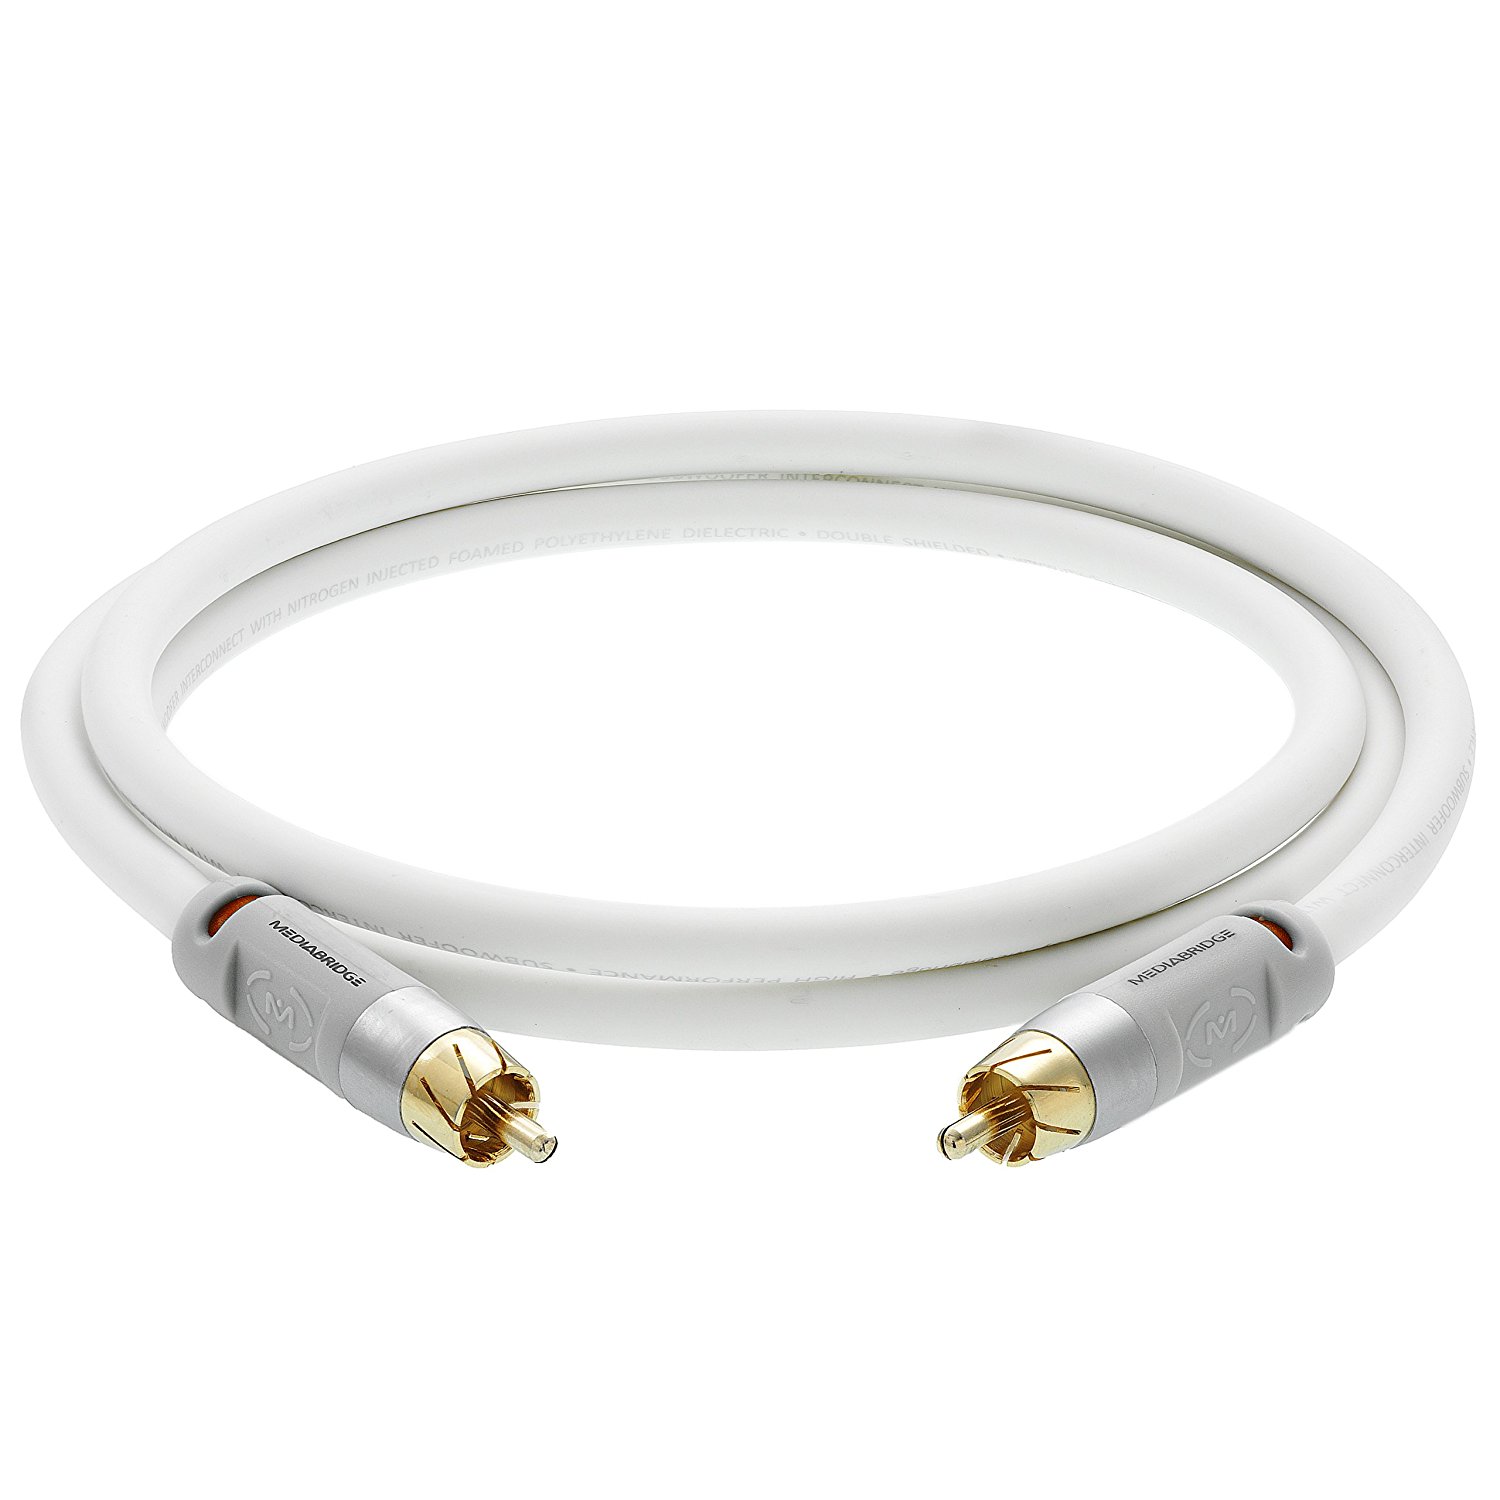 Mediabridge ULTRA Series Digital Audio Coaxial Cable (4 Feet) - Dual Shielded with RCA to RCA Gold-Plated Connectors - White - (Part# CJ04-6WR-G2 ) - image 3 of 4